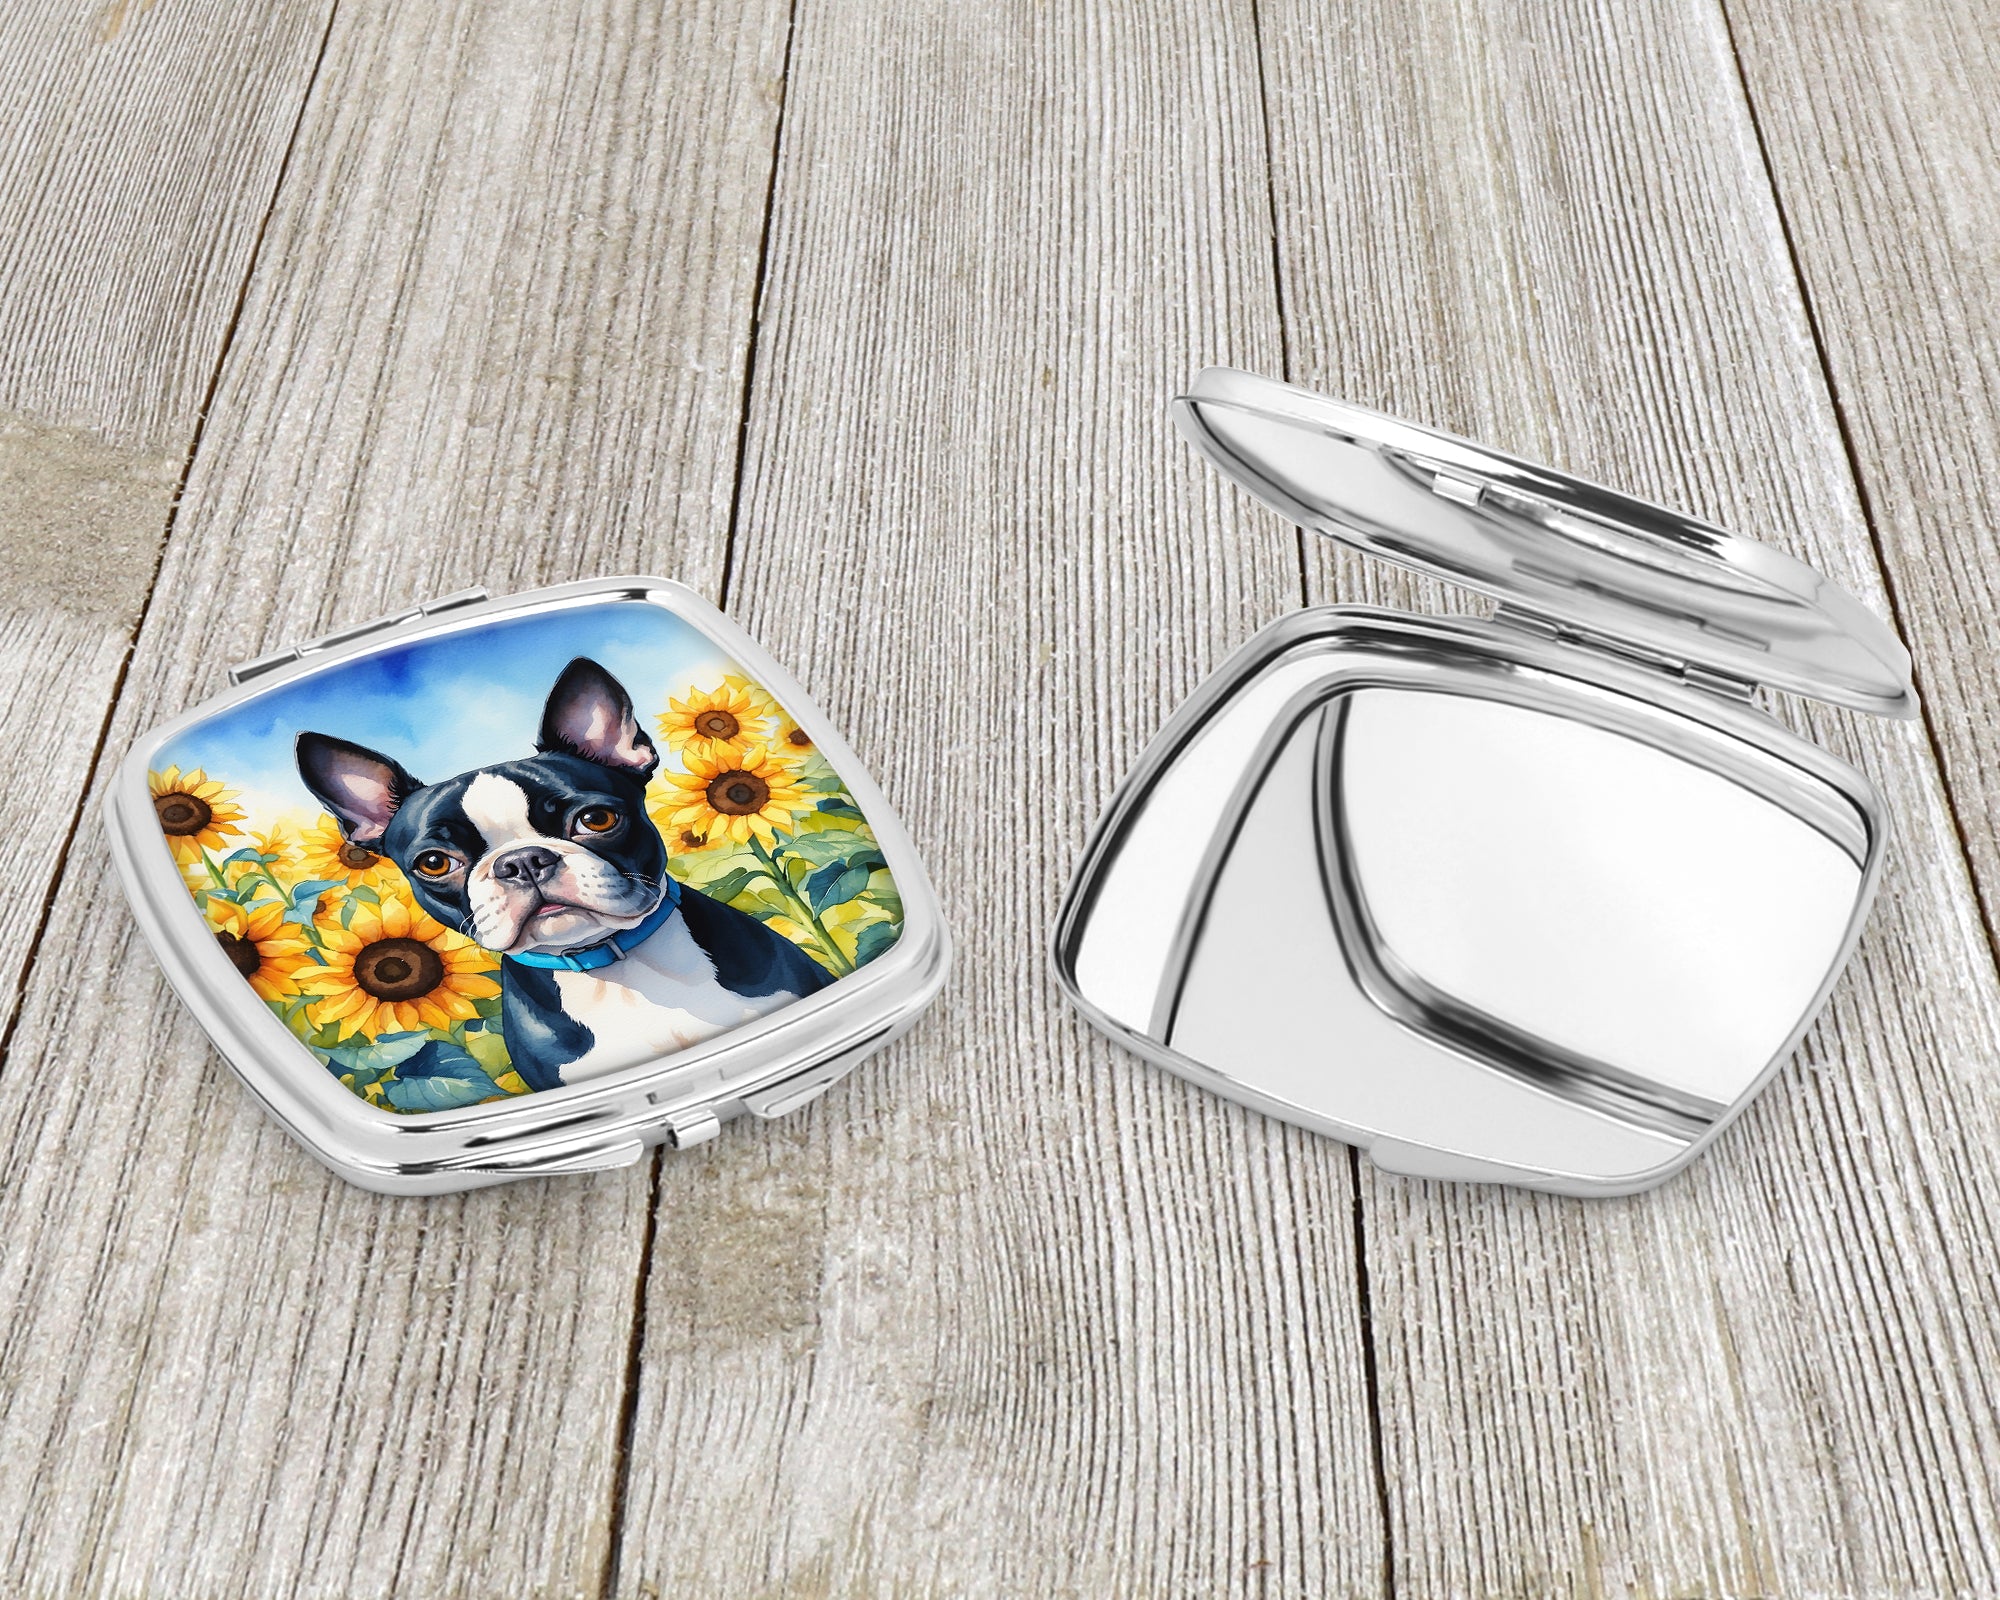 Boston Terrier in Sunflowers Compact Mirror